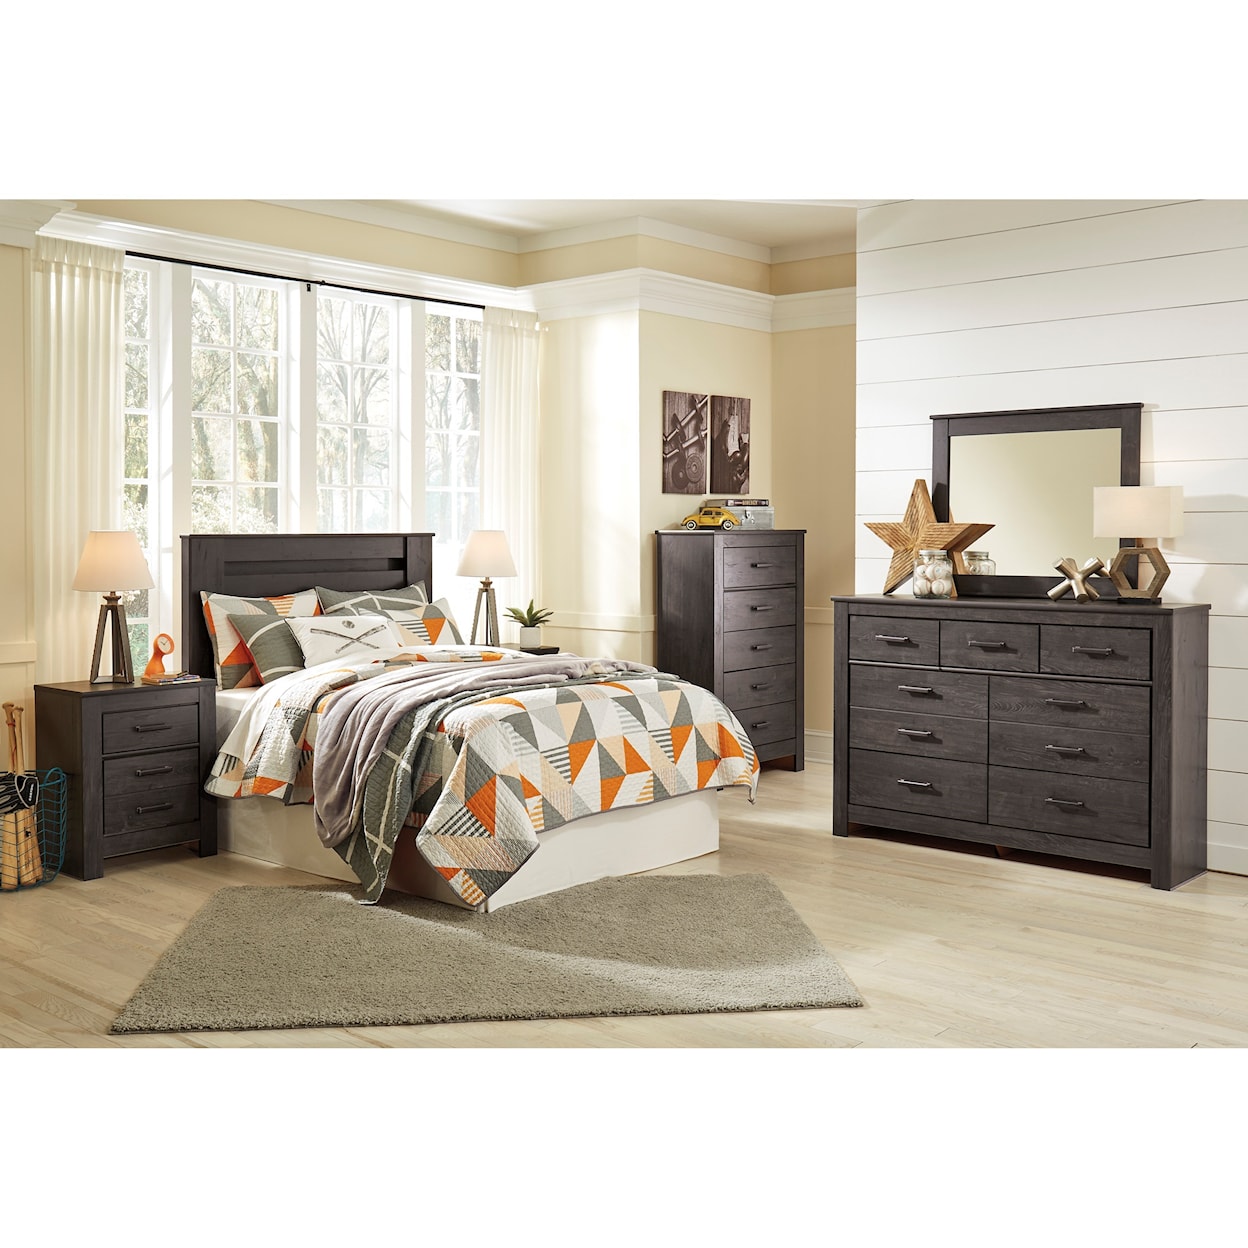 Signature Design by Ashley Brinxton 5pc Full Bedroom Group